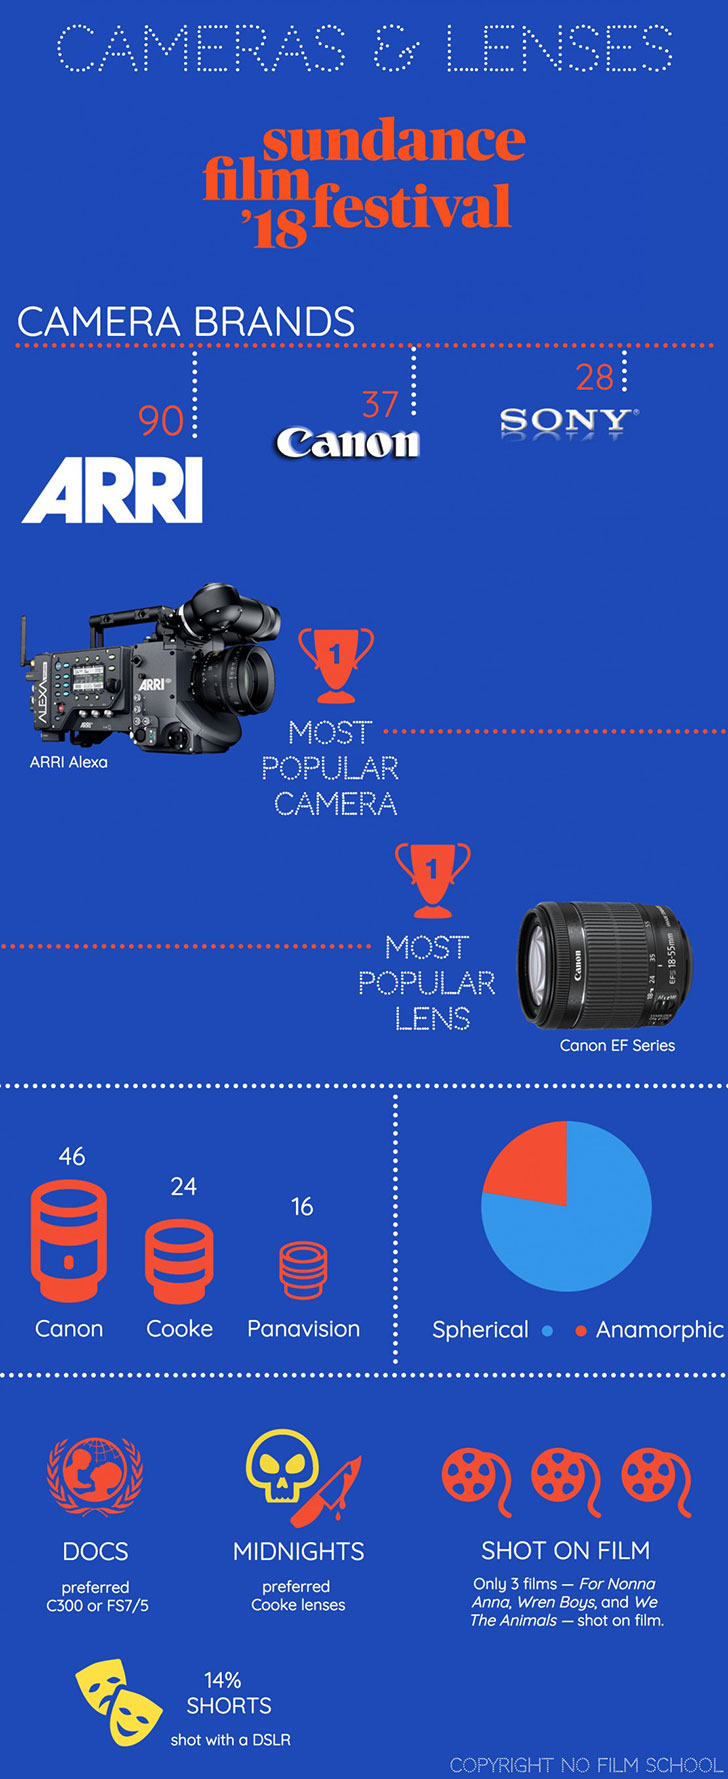 sundance2018gear - Sundance 2018 Infographic: What Was the Most Popular Gear Used for the Films?